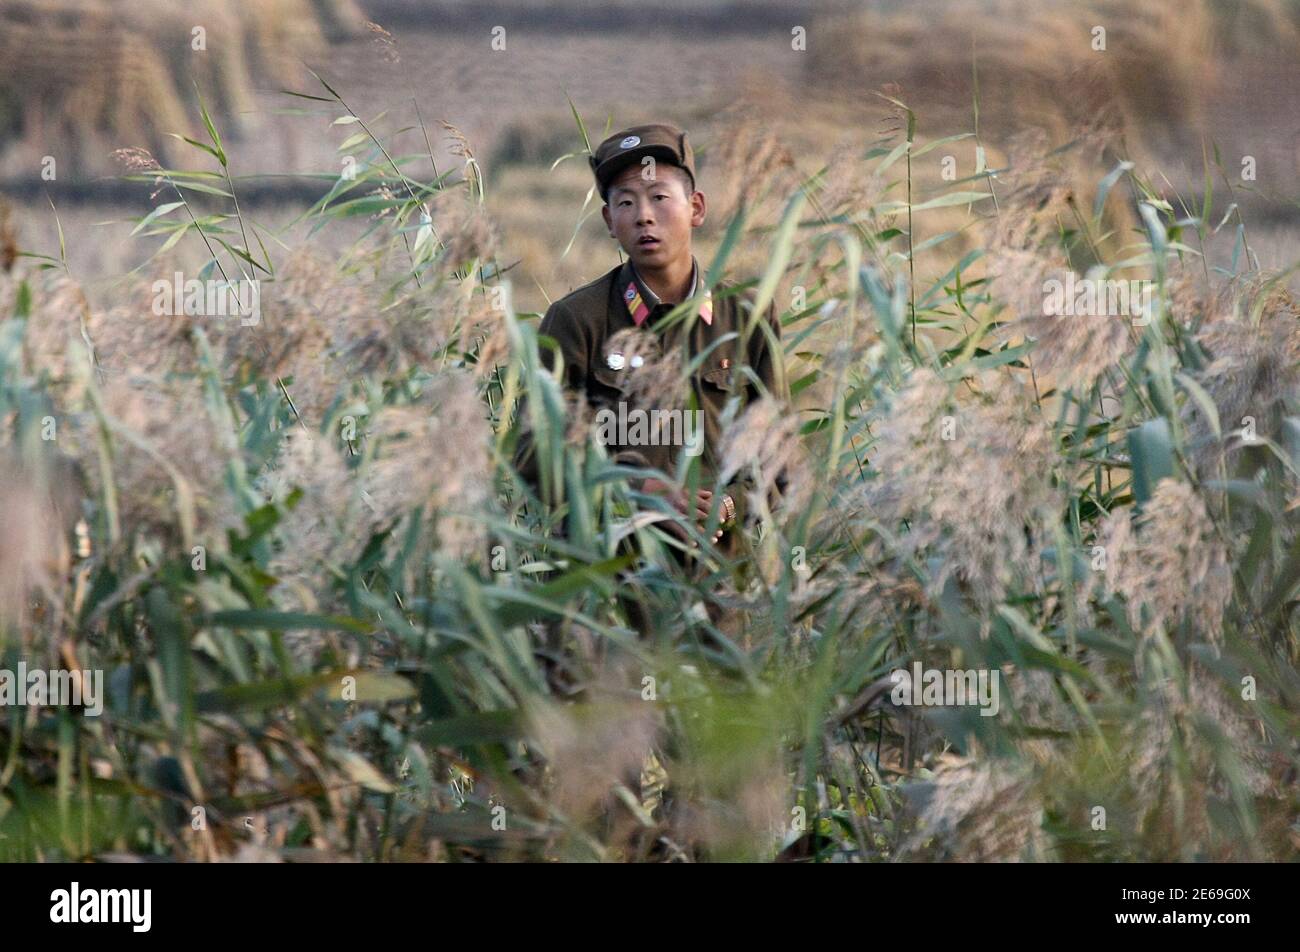 A North Korean soldier guards the banks of the Yalu River near the North Korean town of Sinuiju October 9, 2010.  REUTERS/Stringer (NORTH KOREA - Tags: POLITICS) Stock Photo